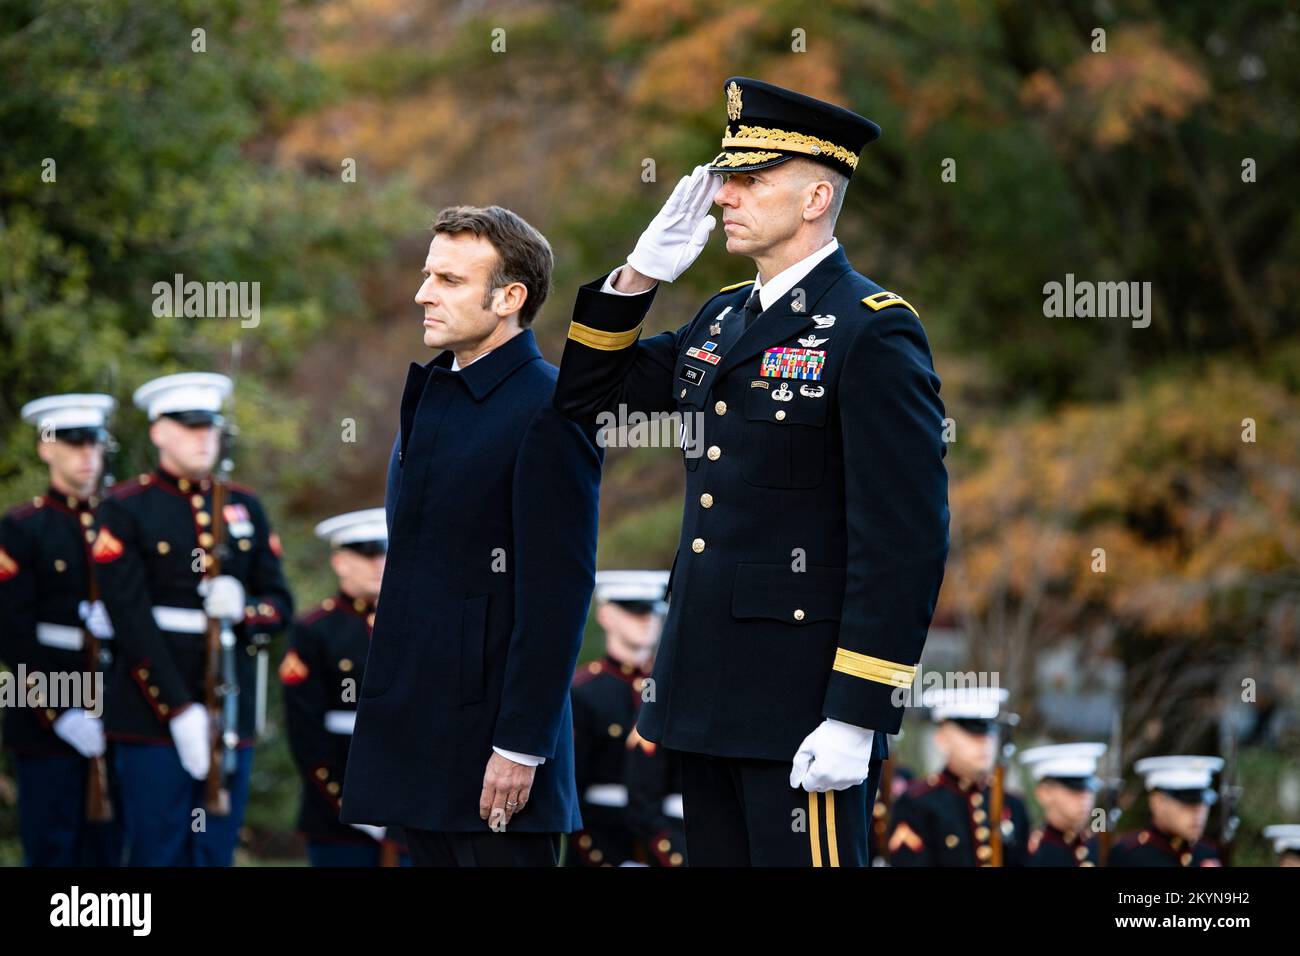 Arlington, United States Of America. 30th Nov, 2022. Arlington, United States of America. 30 November, 2022. French President Emmanuel Macron, center, and U.S. Army Maj. Gen. Allan M. Pepin, right, stand for a moment of silence during the full honors wreath-laying ceremony at the Tomb of the Unknown Soldier at Arlington National Cemetery, November 30, 2022 in Arlington, Virginia, USA. Credit: Elizabeth Fraser/U.S. Army/Alamy Live News Stock Photo